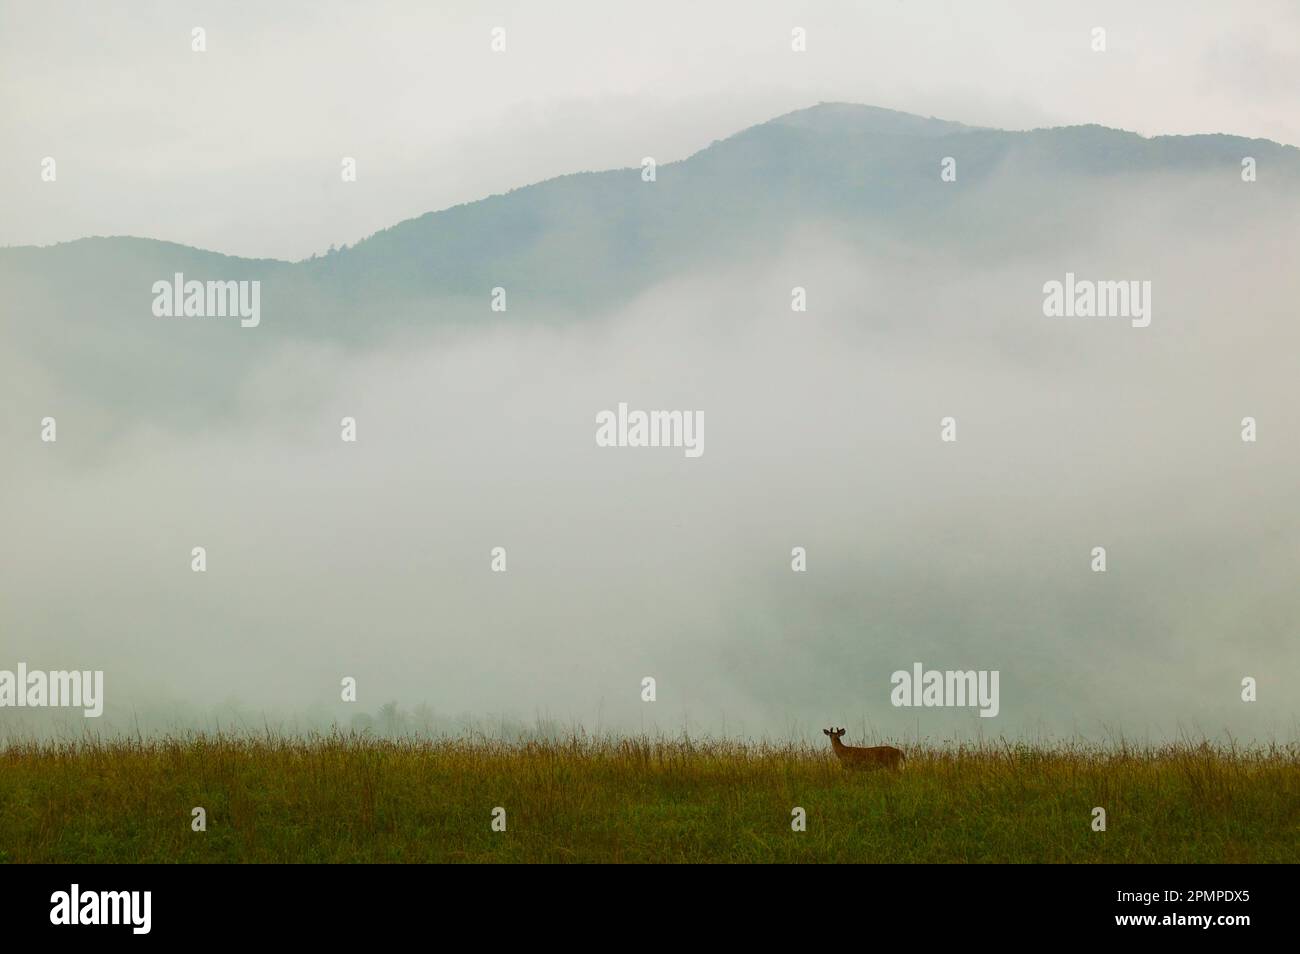 White-tailed deer (Odocoileus virginianus) in Cades Cove, Great Smoky Mountains National Park, Tennessee, USA; Tennessee, United States of America Stock Photo